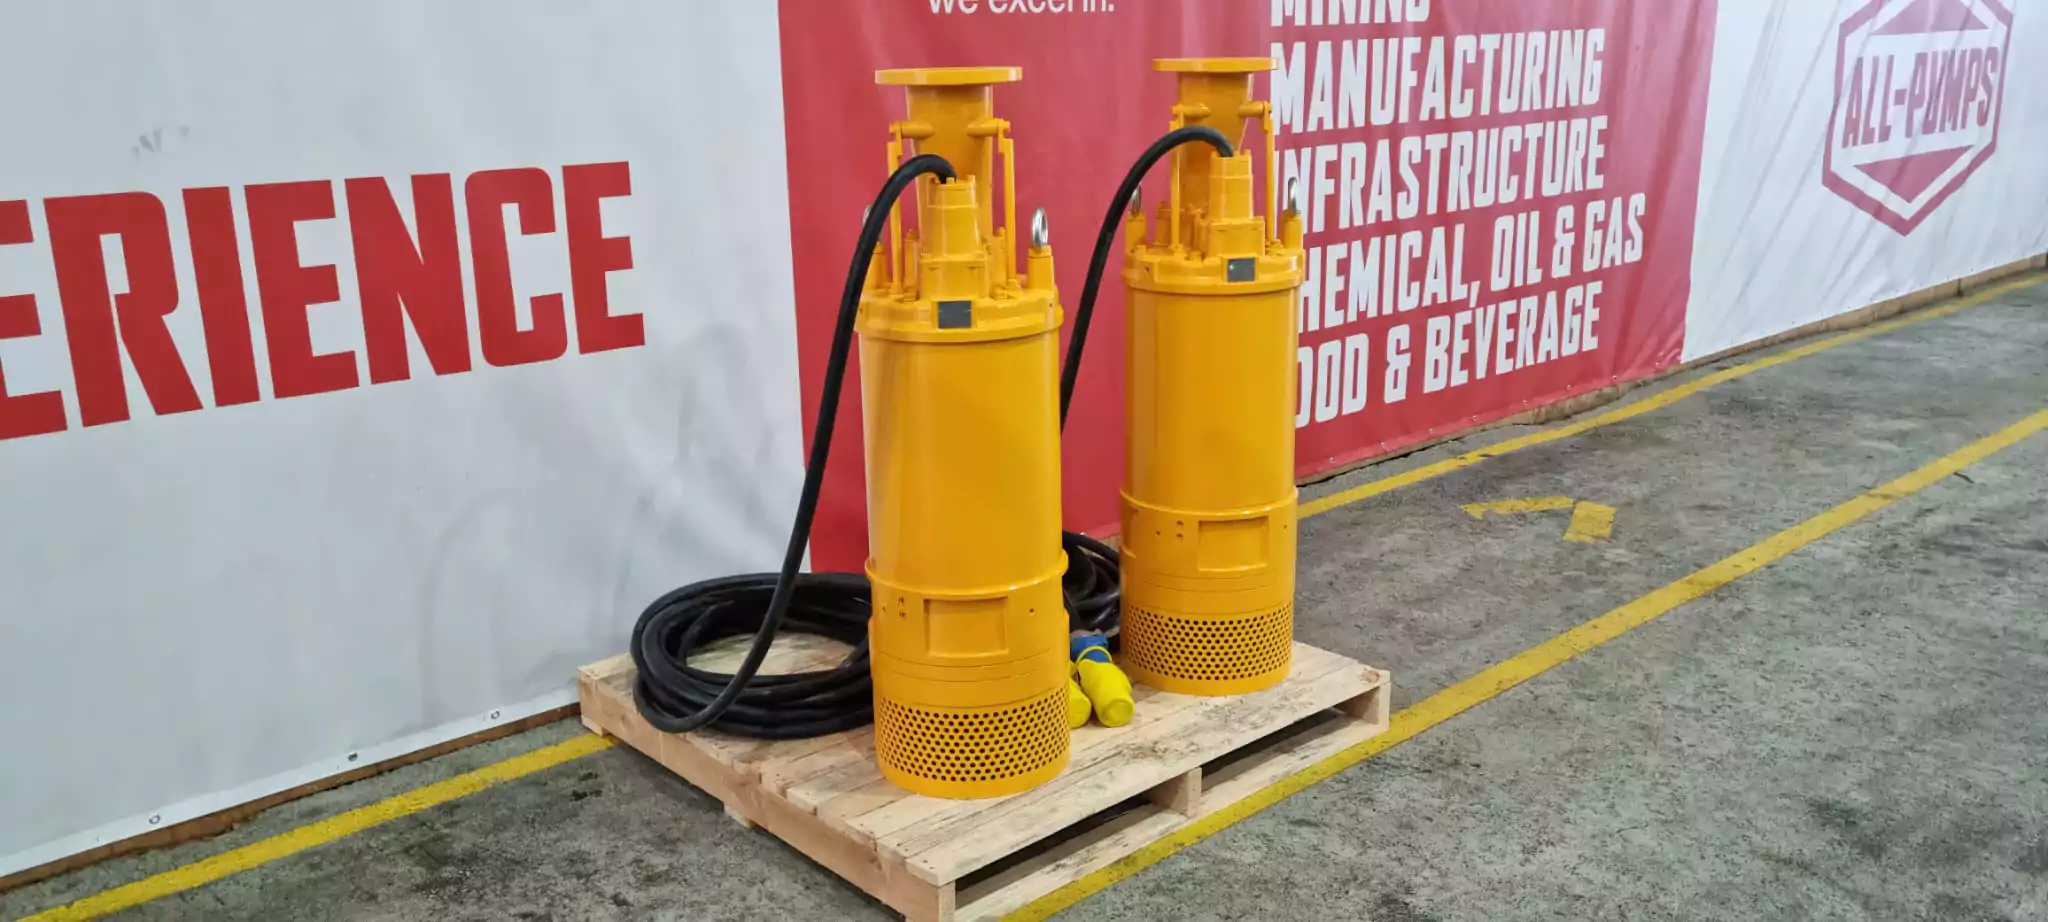 two-yellow-tsurumi-pumps-on-a-pallet-with-a-sign-that-says-experience-at-1000-volt-mine-dewatering-site